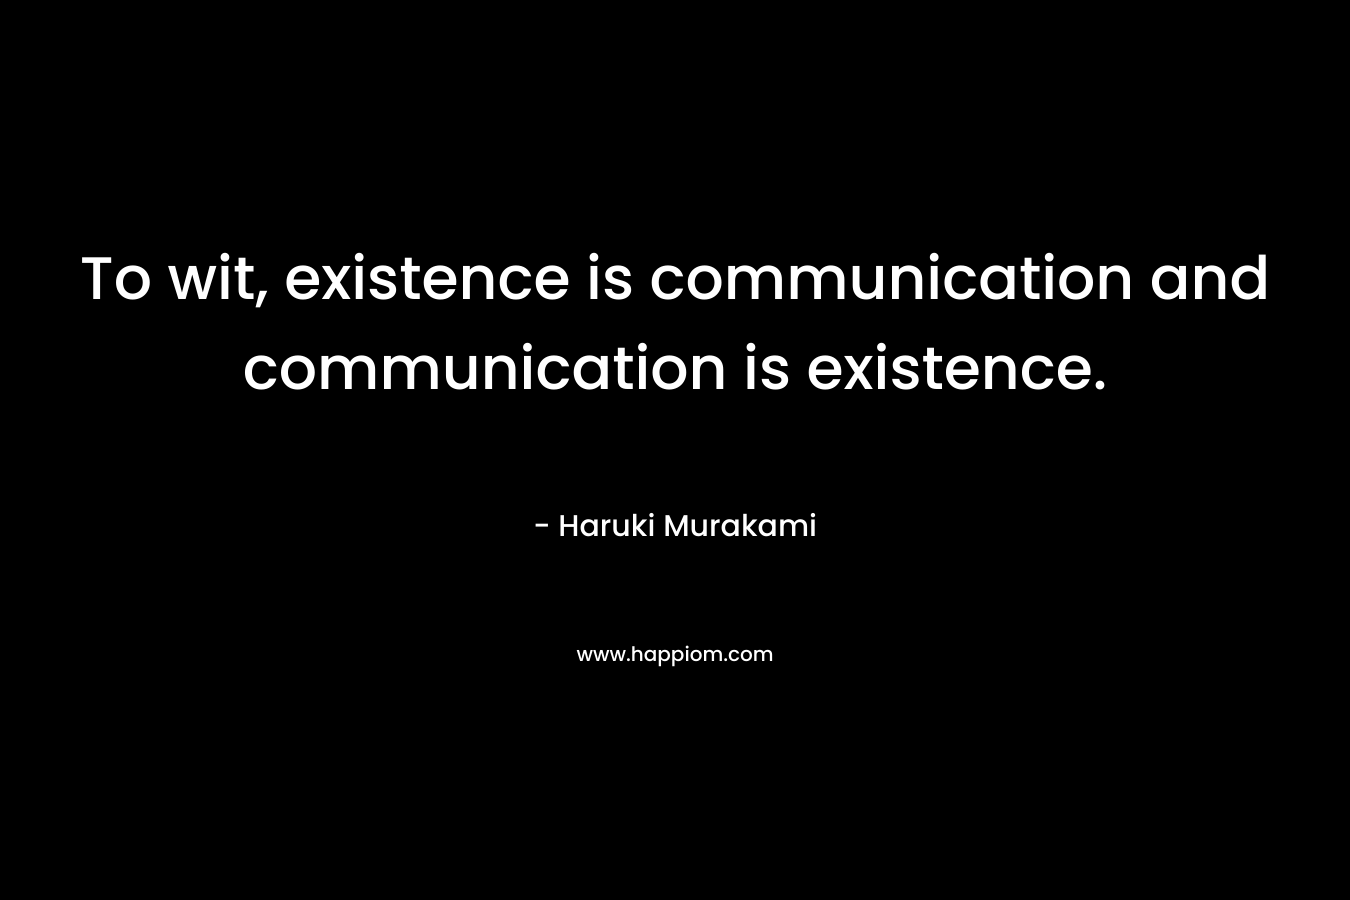 To wit, existence is communication and communication is existence.